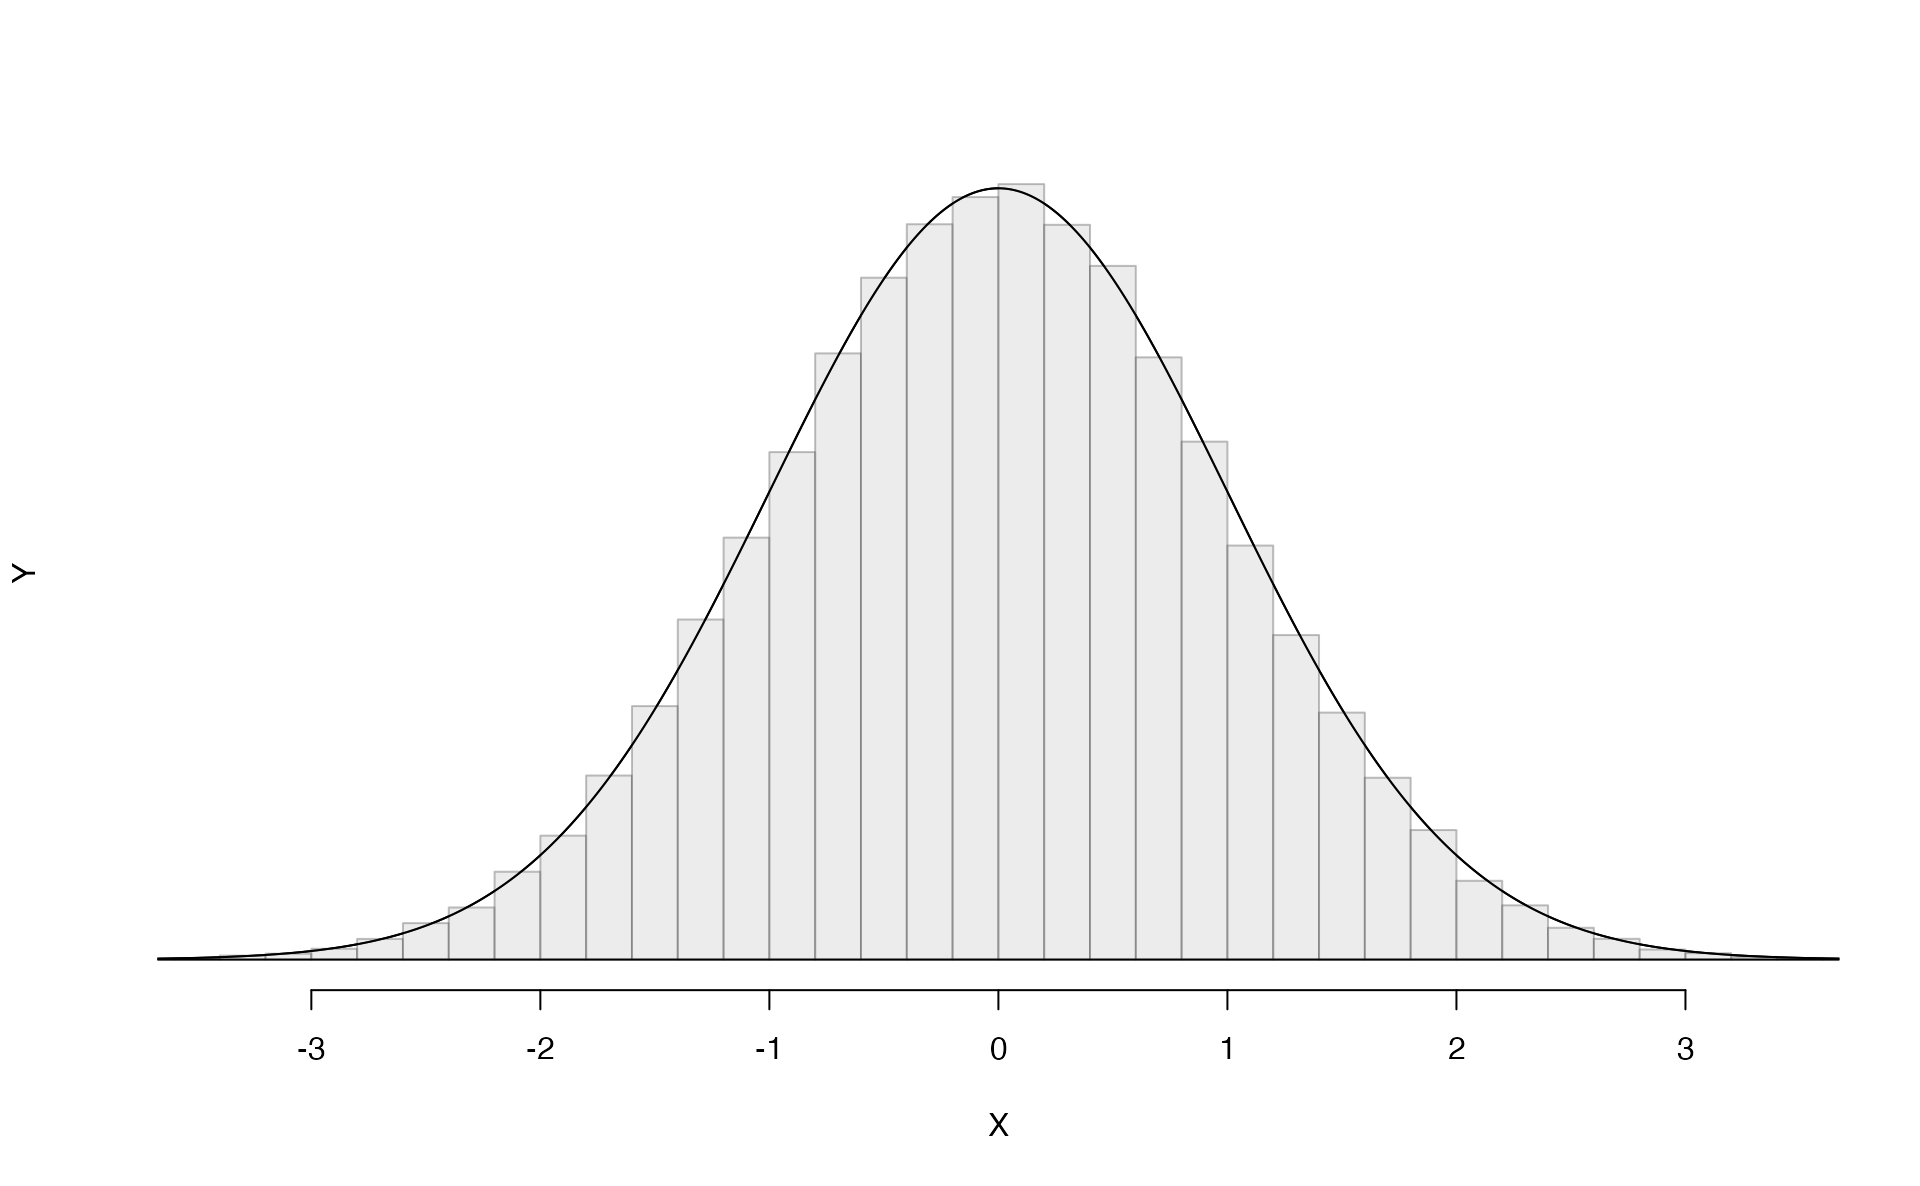 Both curves represent the normal distribution, however, they differ in their center and spread. The normal distribution with mean 0 and standard deviation 1 is called the **standard normal distribution**.